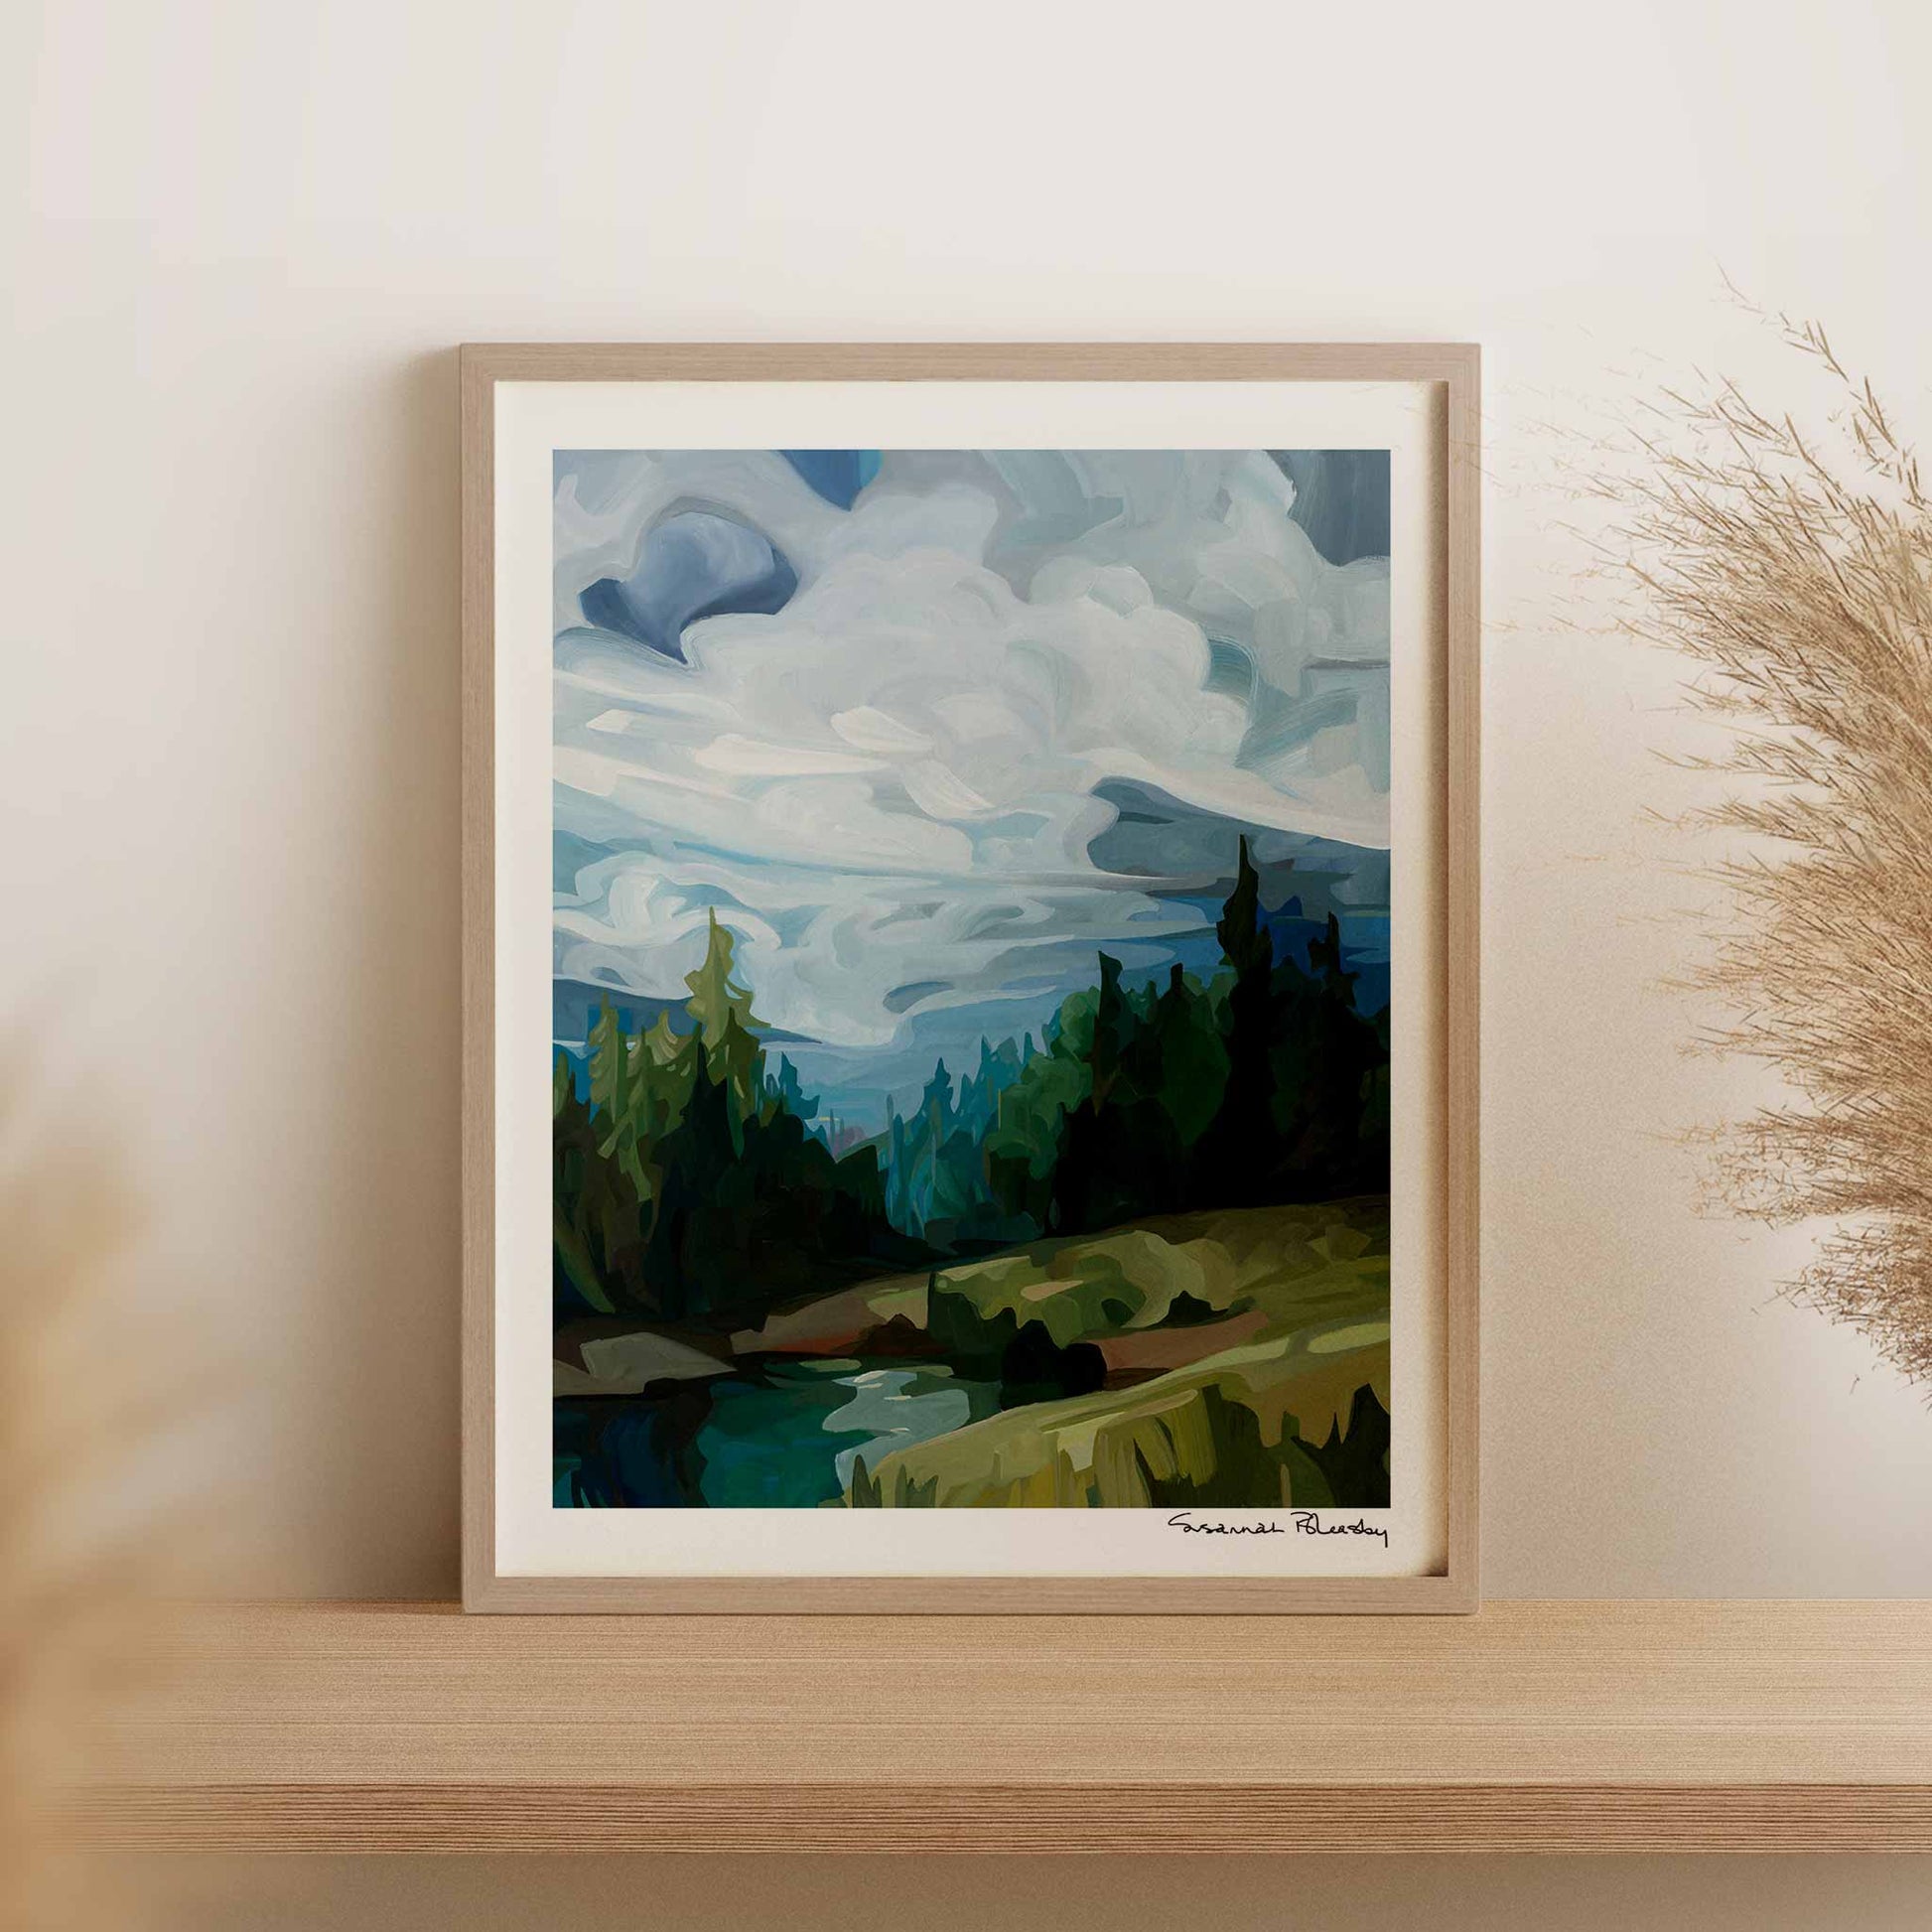 16x20 art print of a hillside mountain painting by Canadian abstract artist Susannah Bleasby